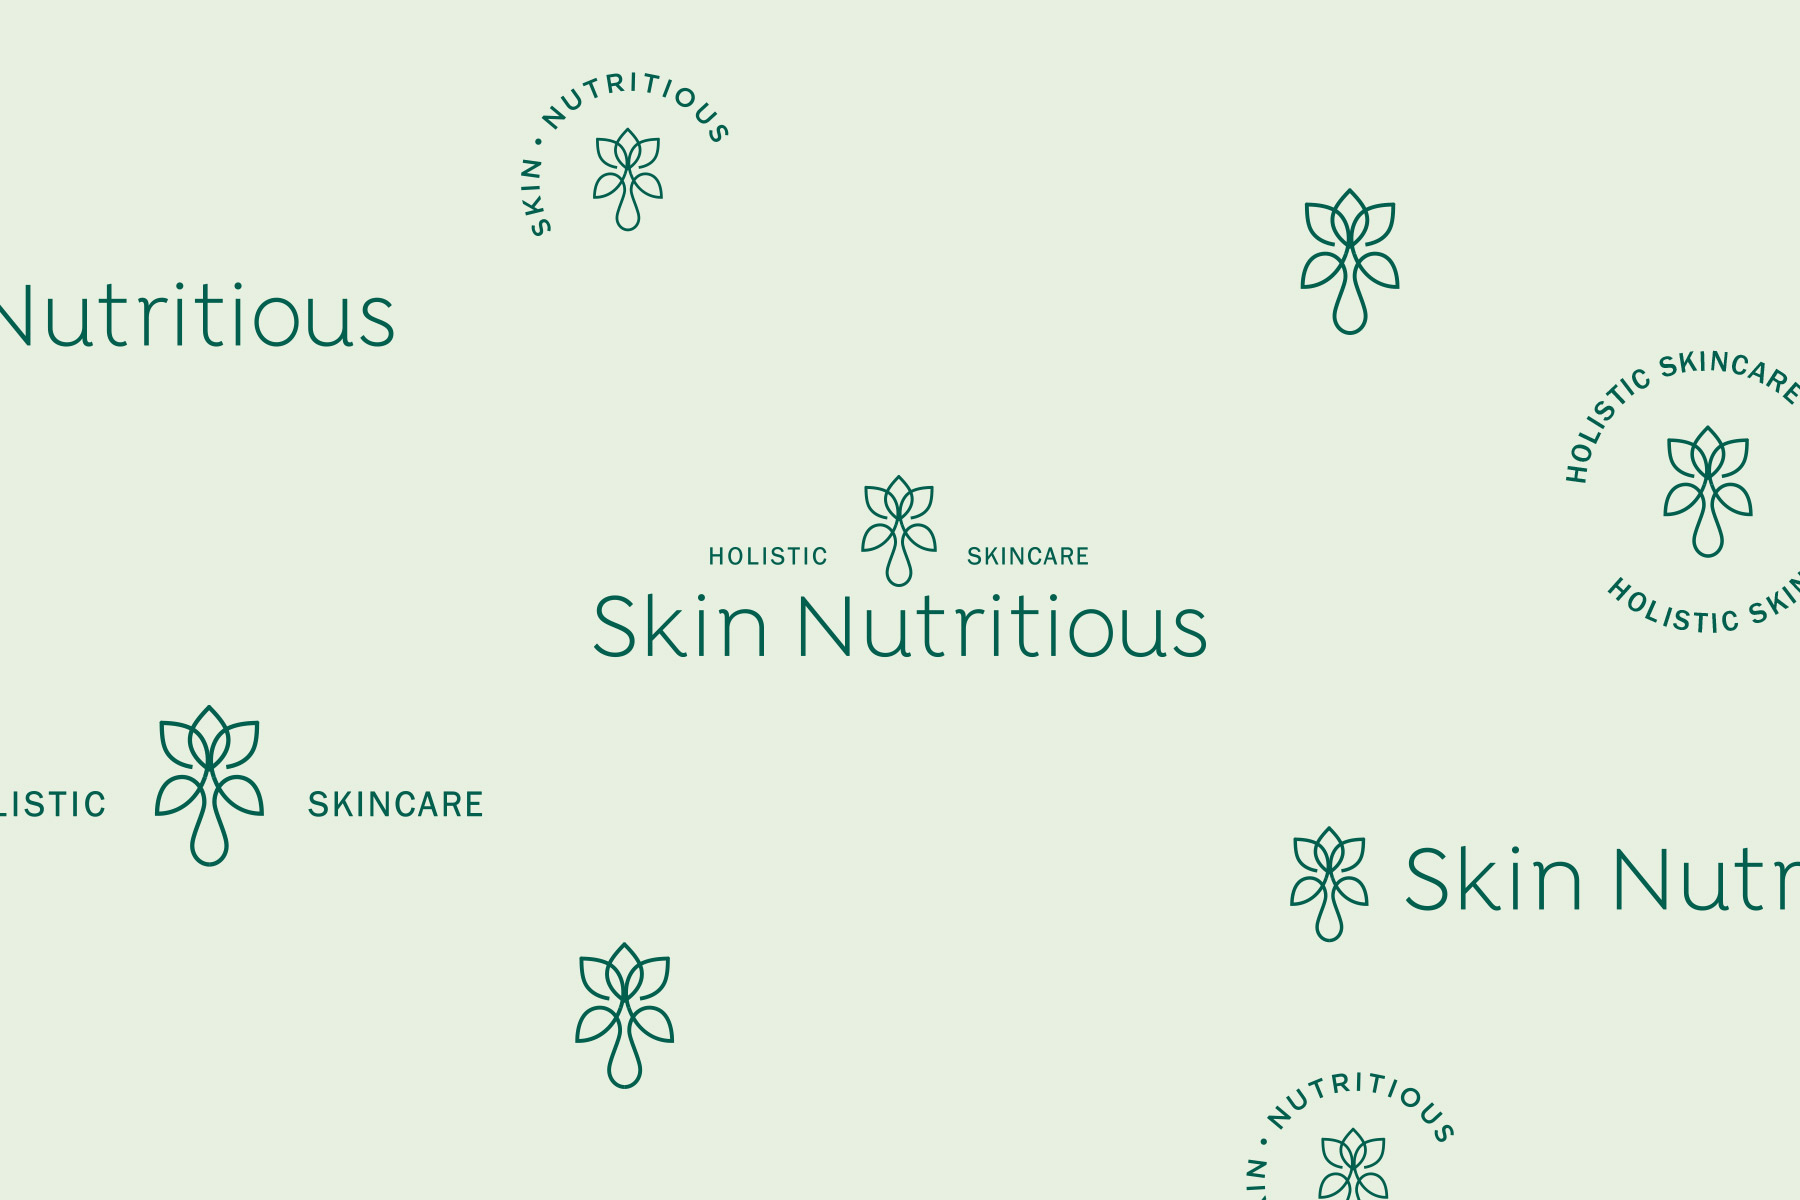 Skin Nutritious brand marks in beautiful layout presentation